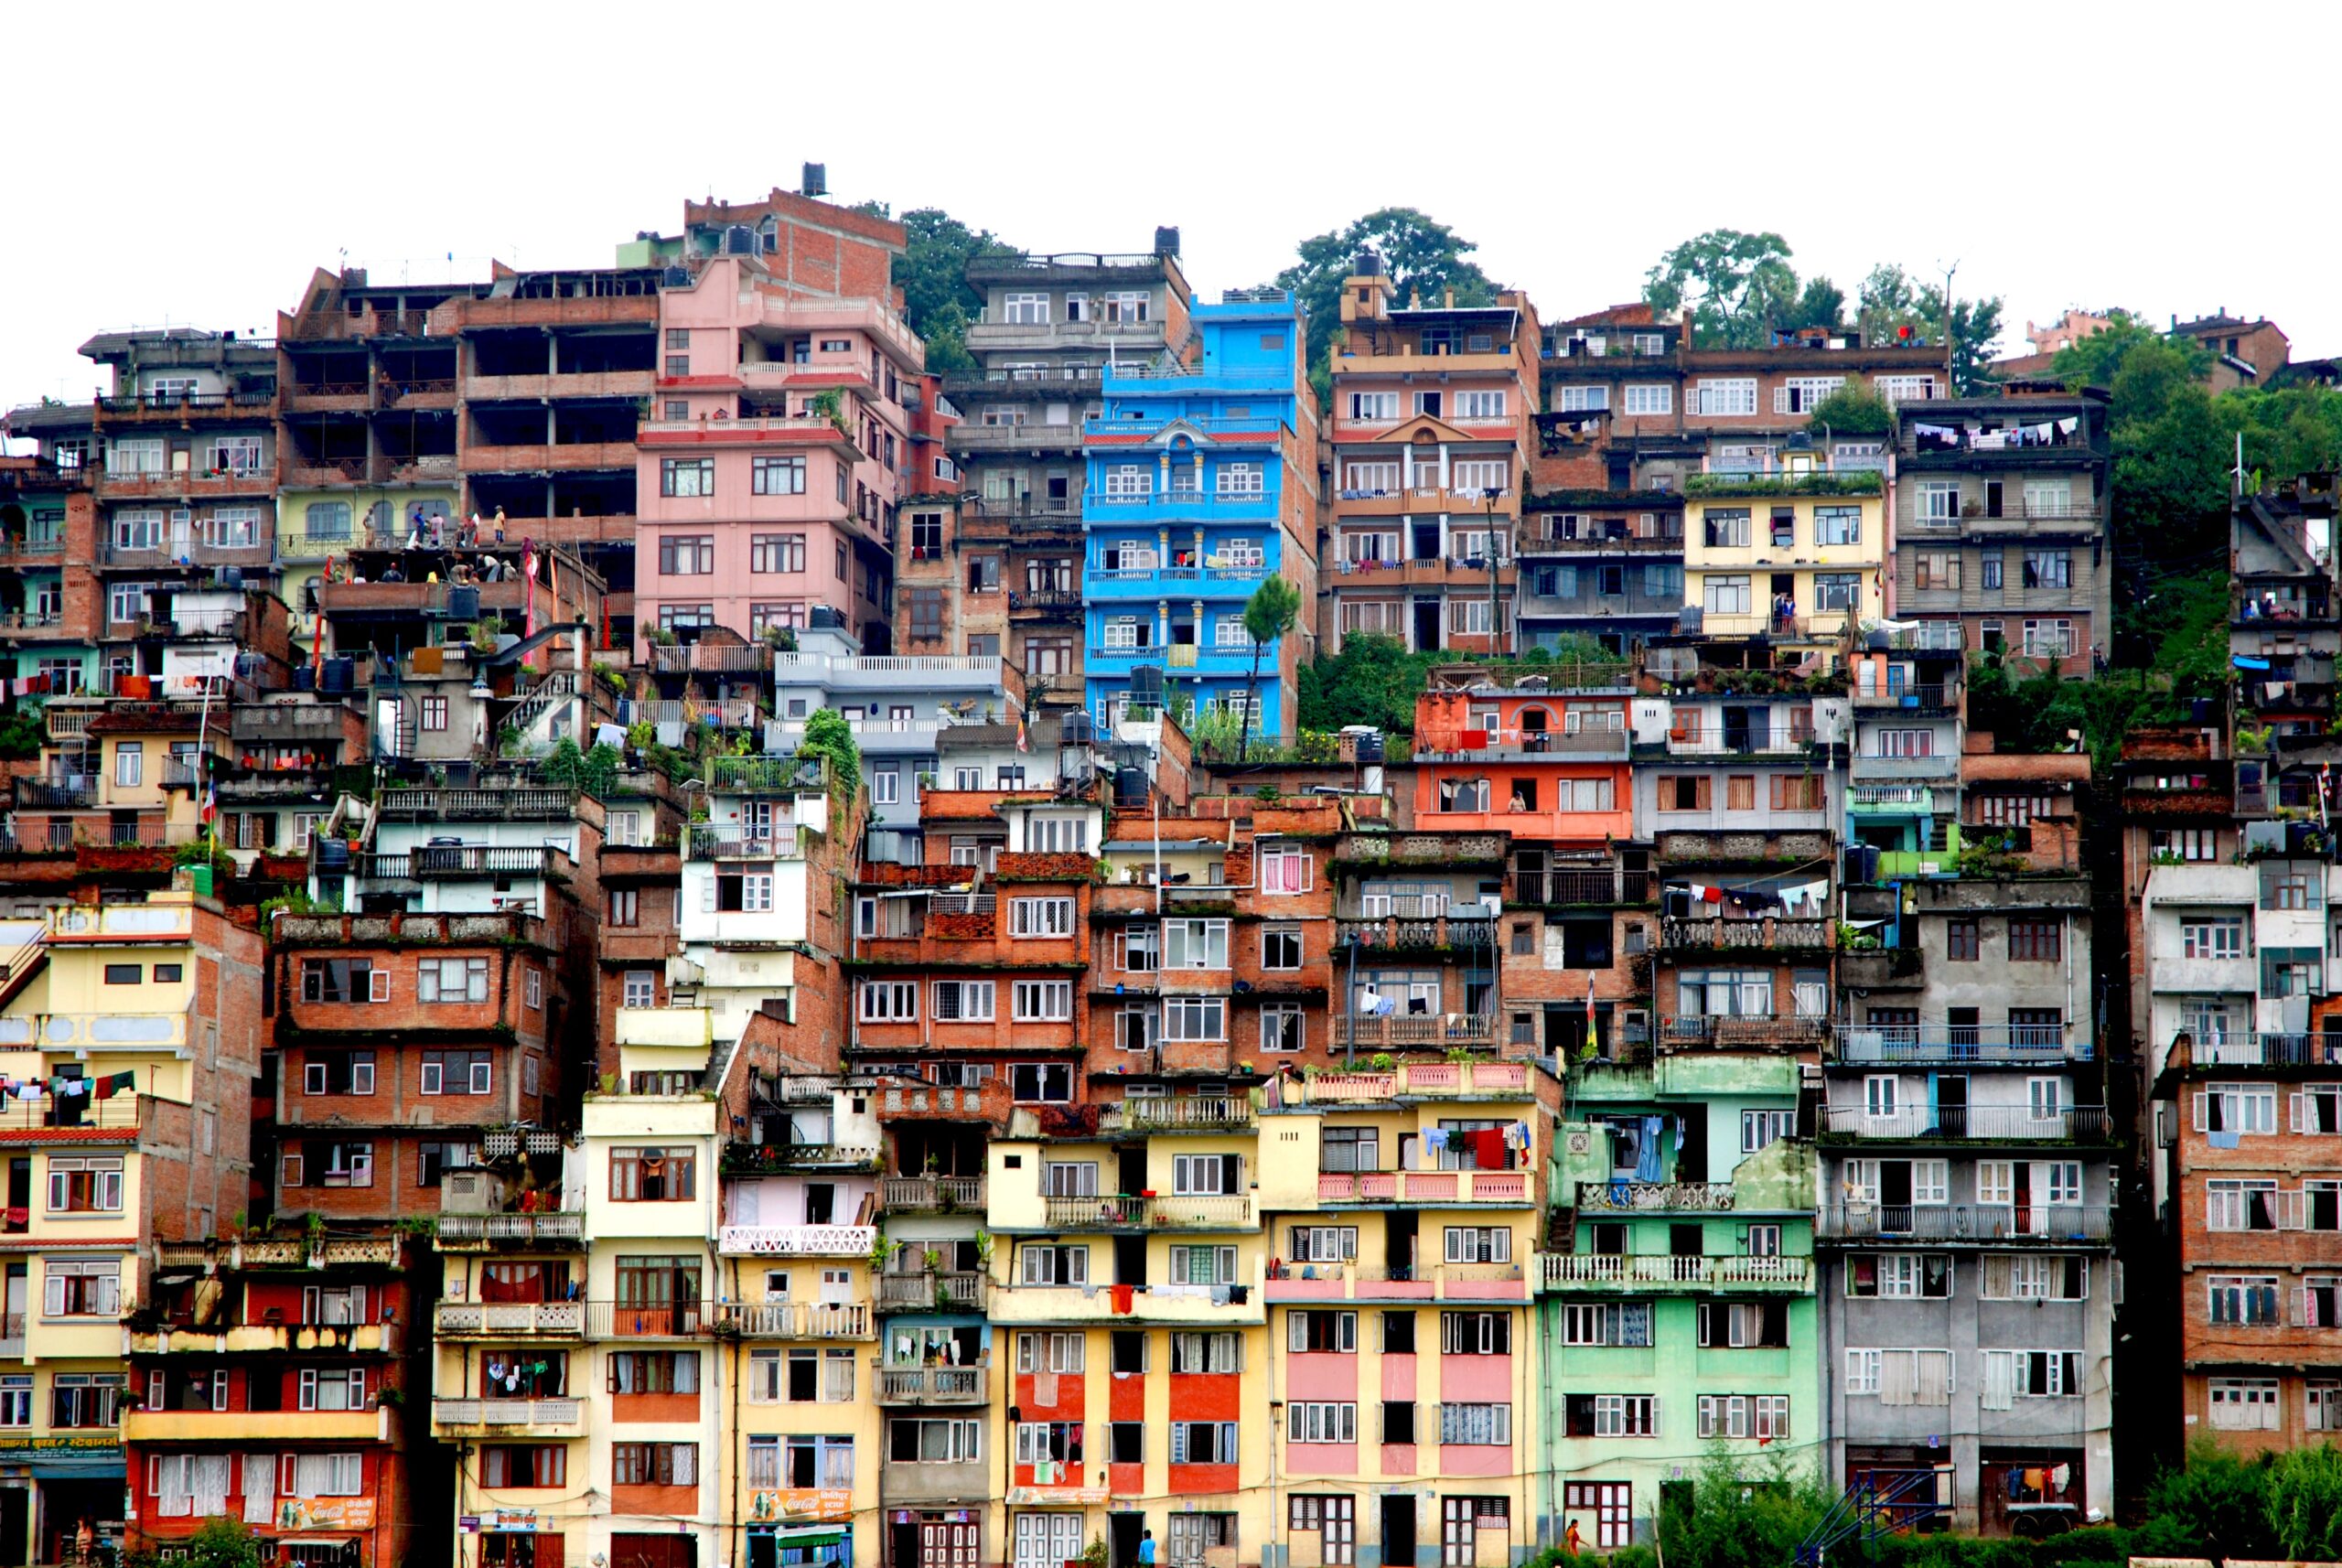 The total number of houses in Nepal is 7,552,066